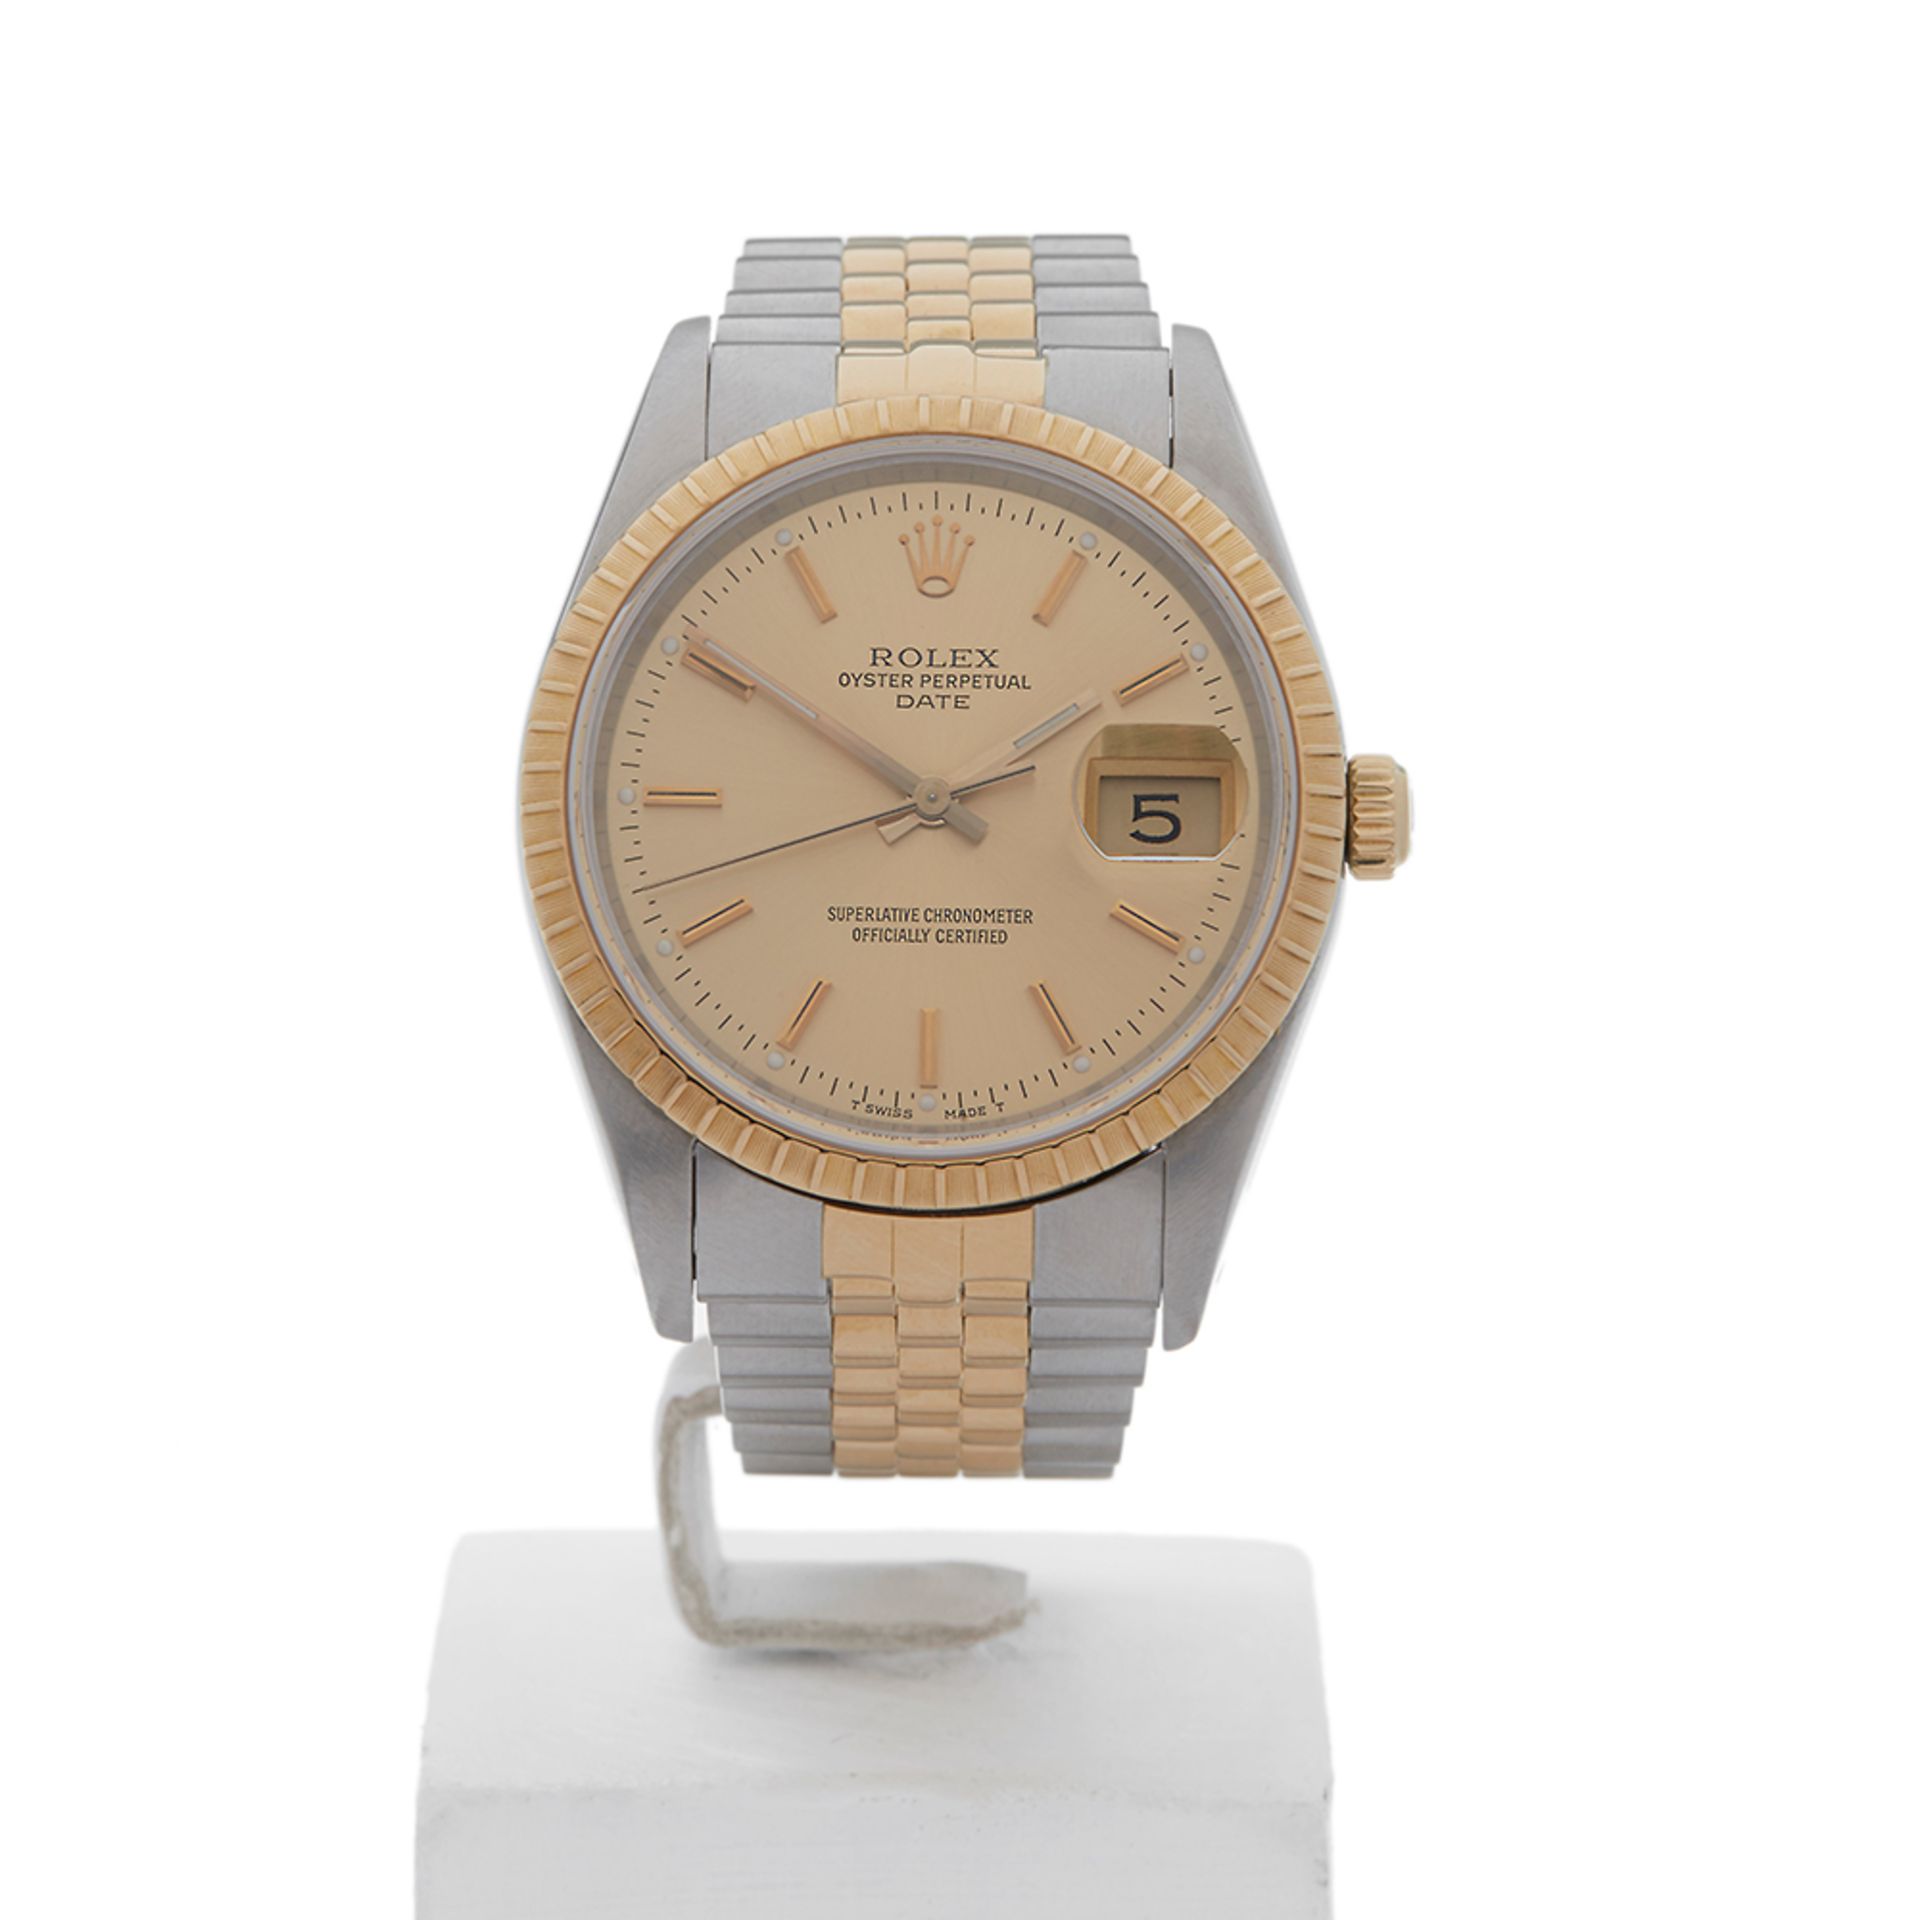 Oyster Perpetual Date 36mm Stainless Steel & 18k Yellow Gold - 15233 - Image 2 of 8